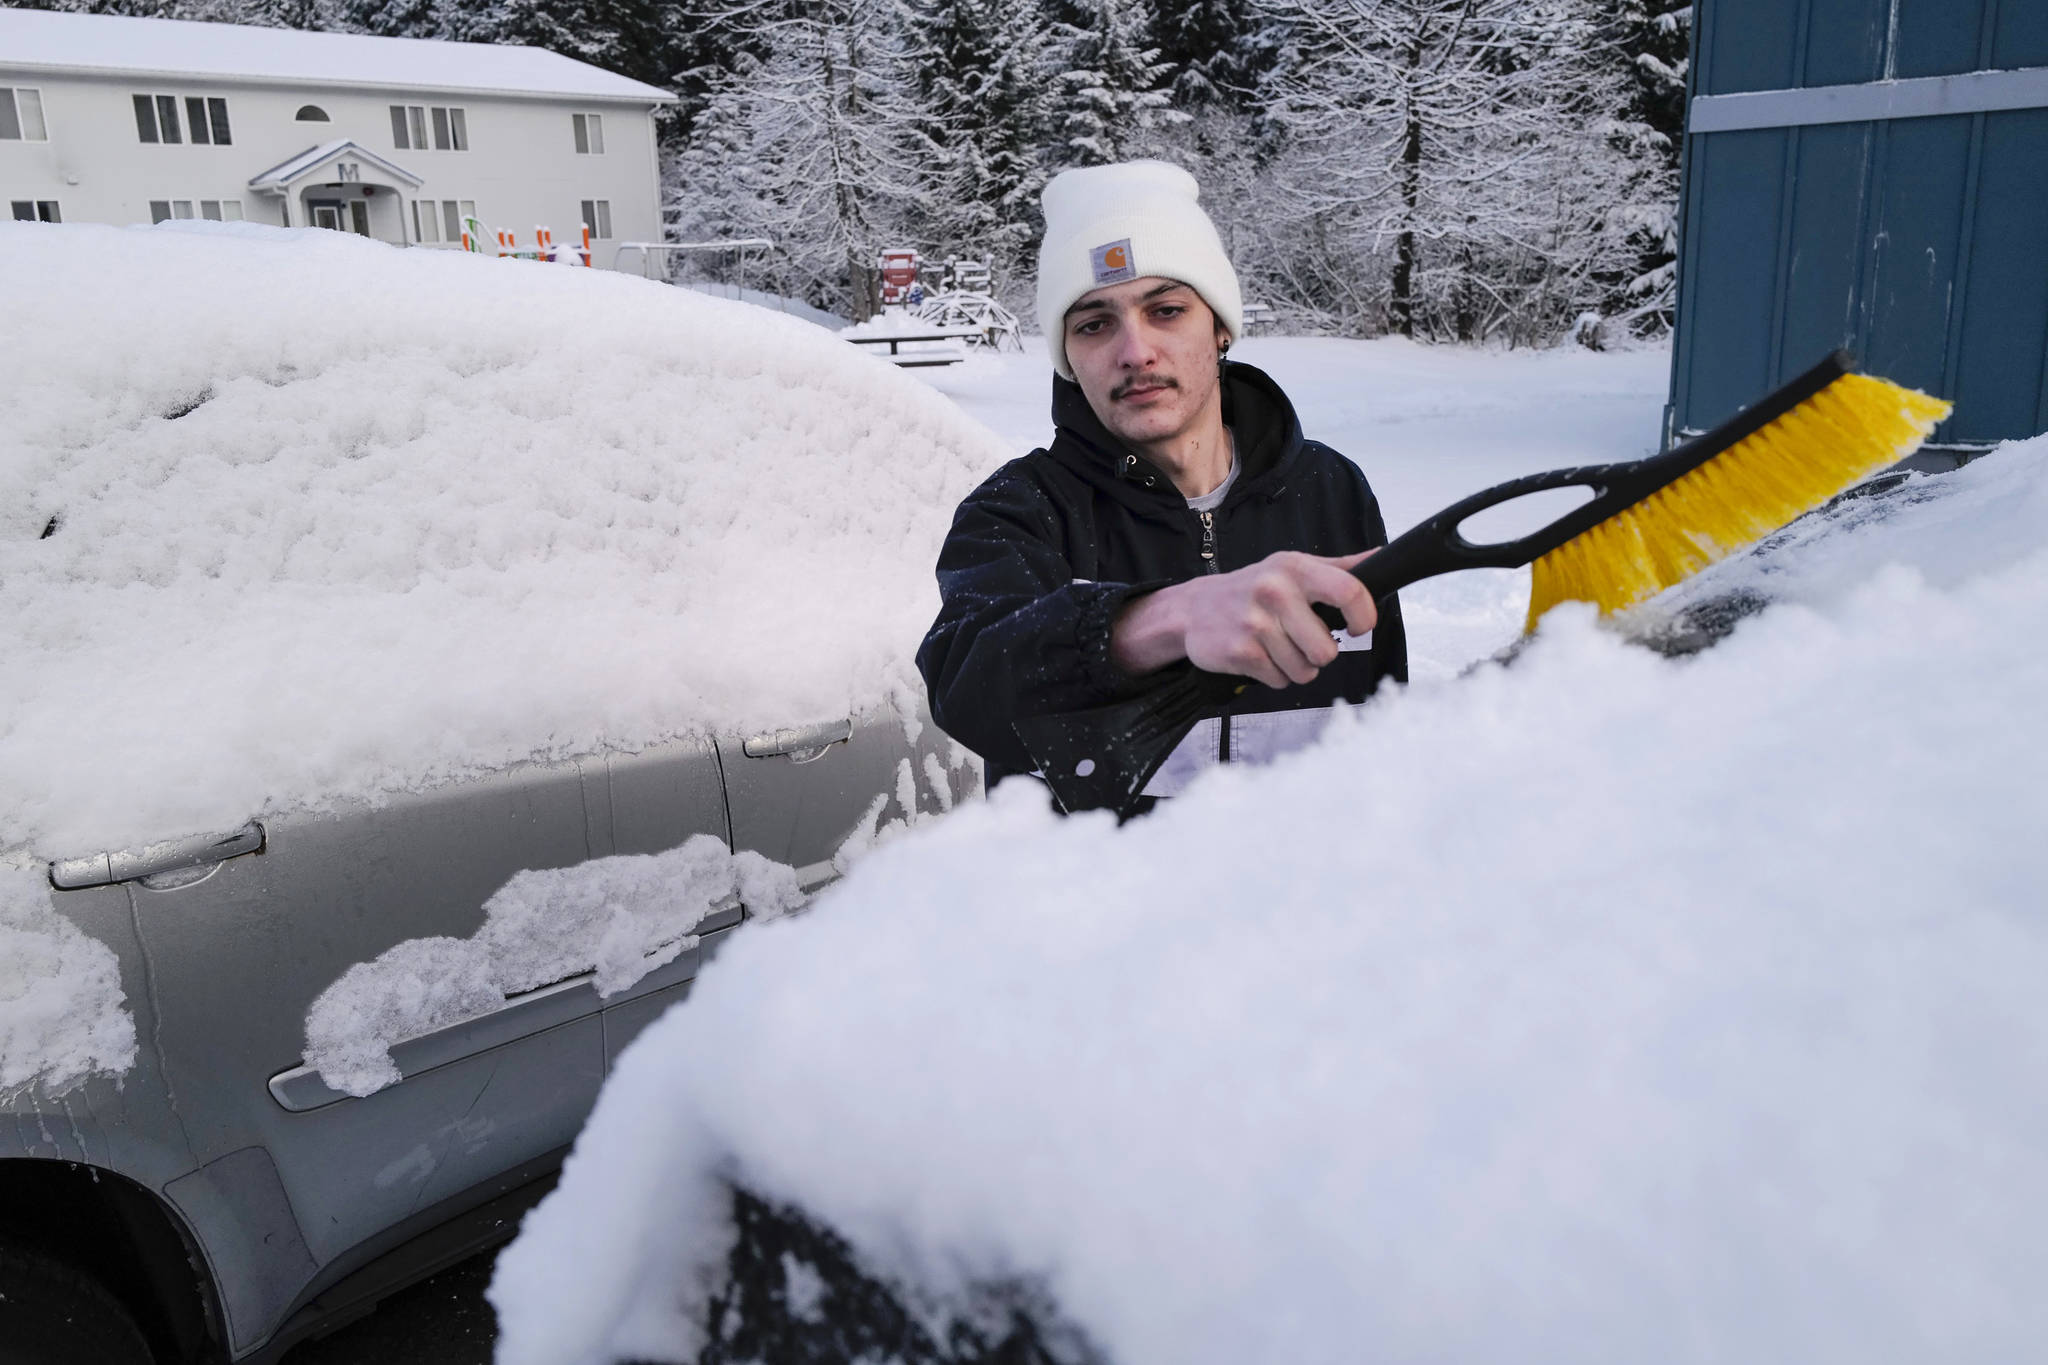 Tommy Reber cleans a fresh coat of snow off his vehicle at Gruening Park on Monday, Jan. 6, 2020. (Michael Penn | Juneau Empire)